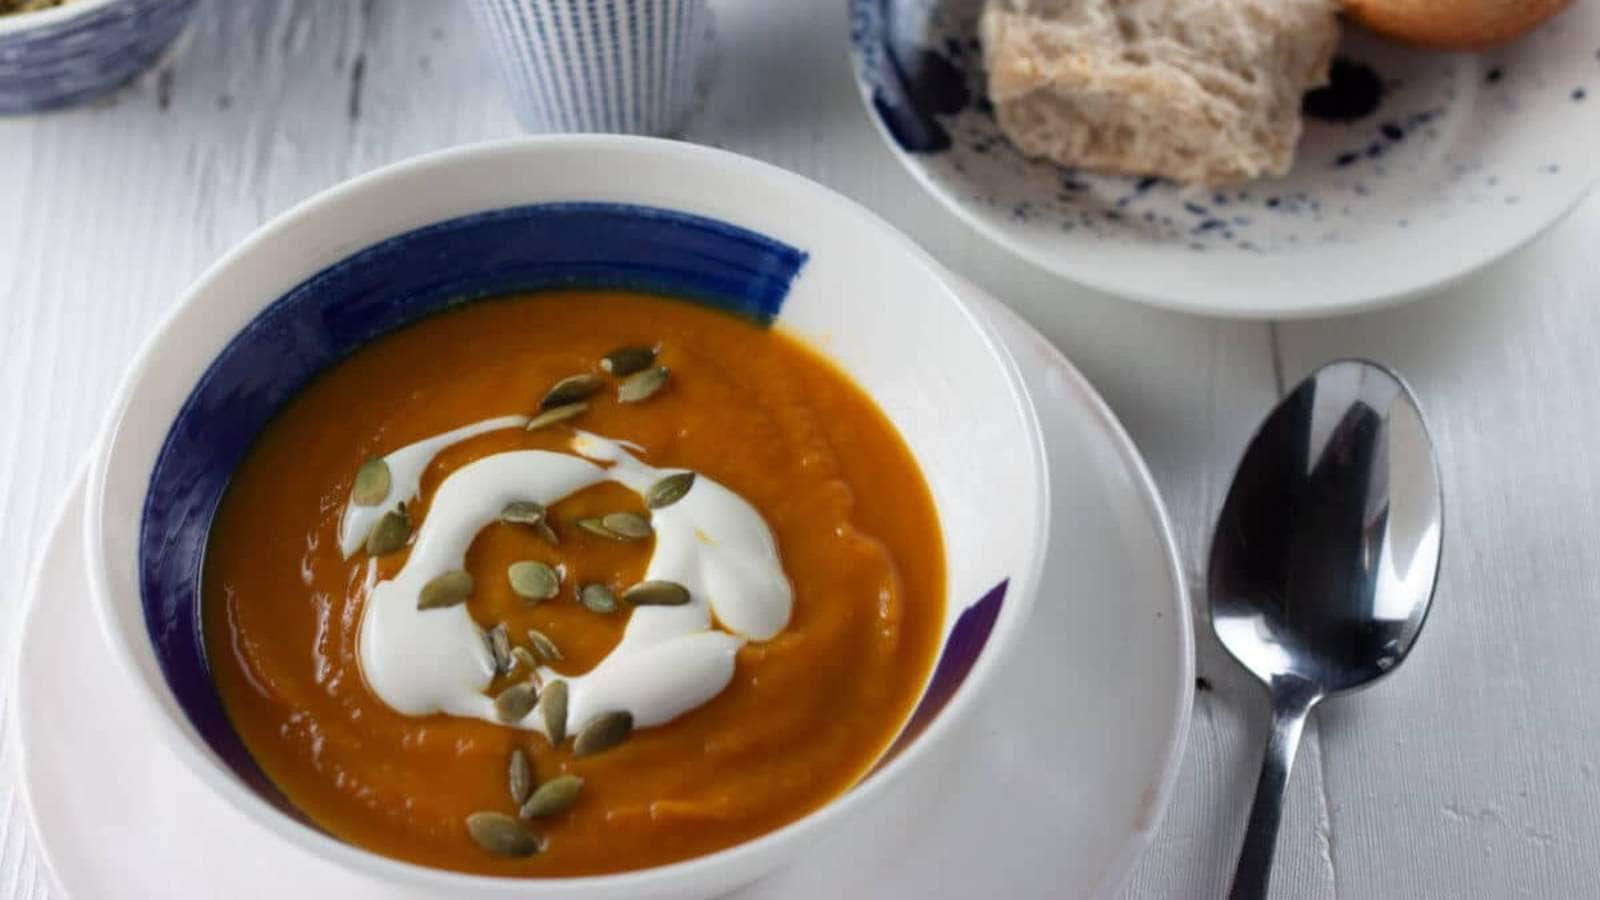 Creamy Roasted Sweet Potato Soup recipe by Midwexican.